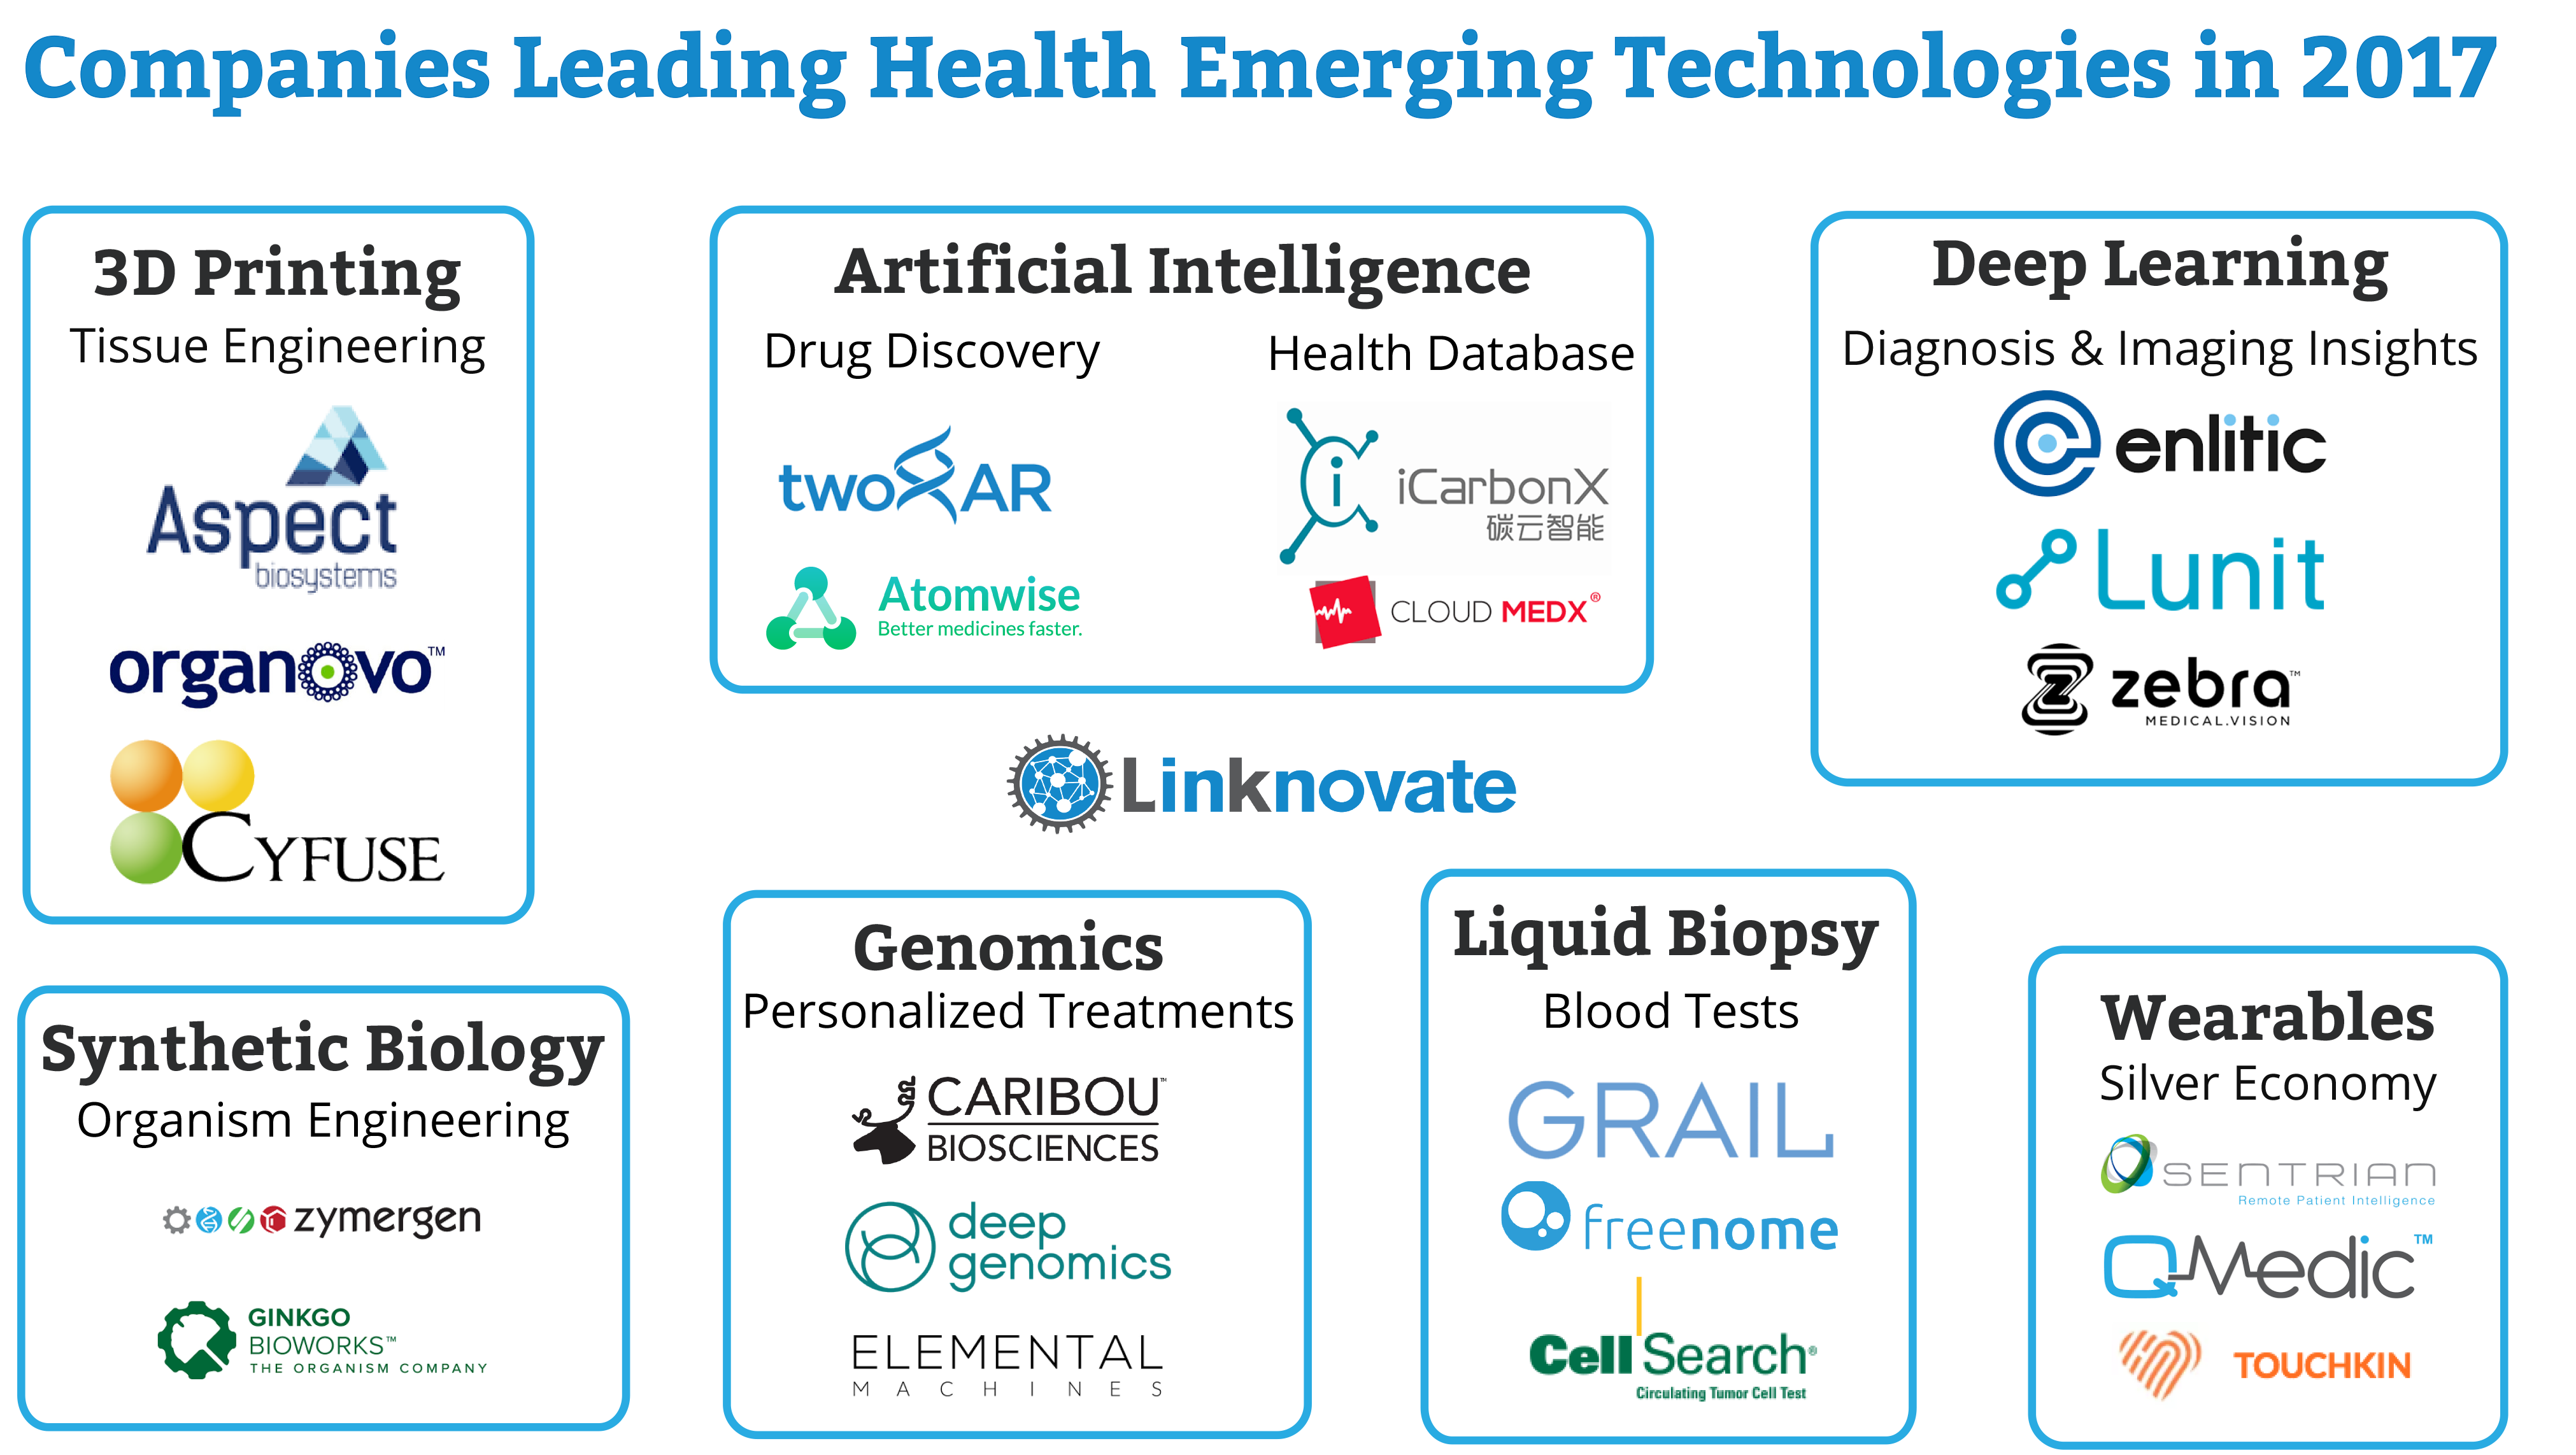 7 Health Emerging Technologies to Scout in 2017